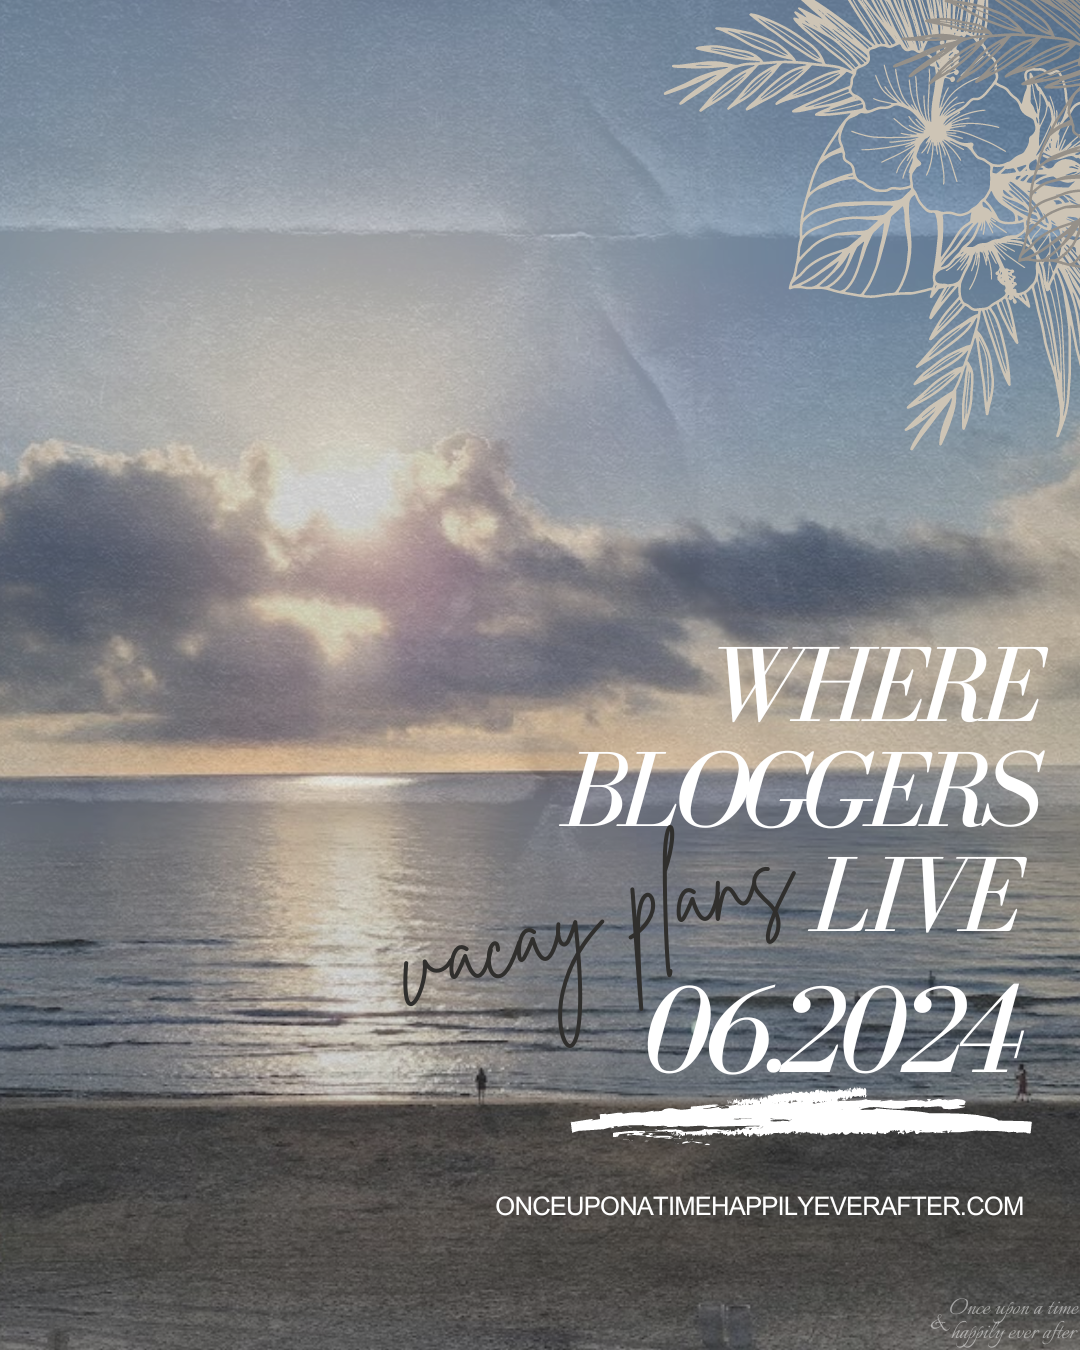 Where Bloggers Live 06.2024: Vacay Plans